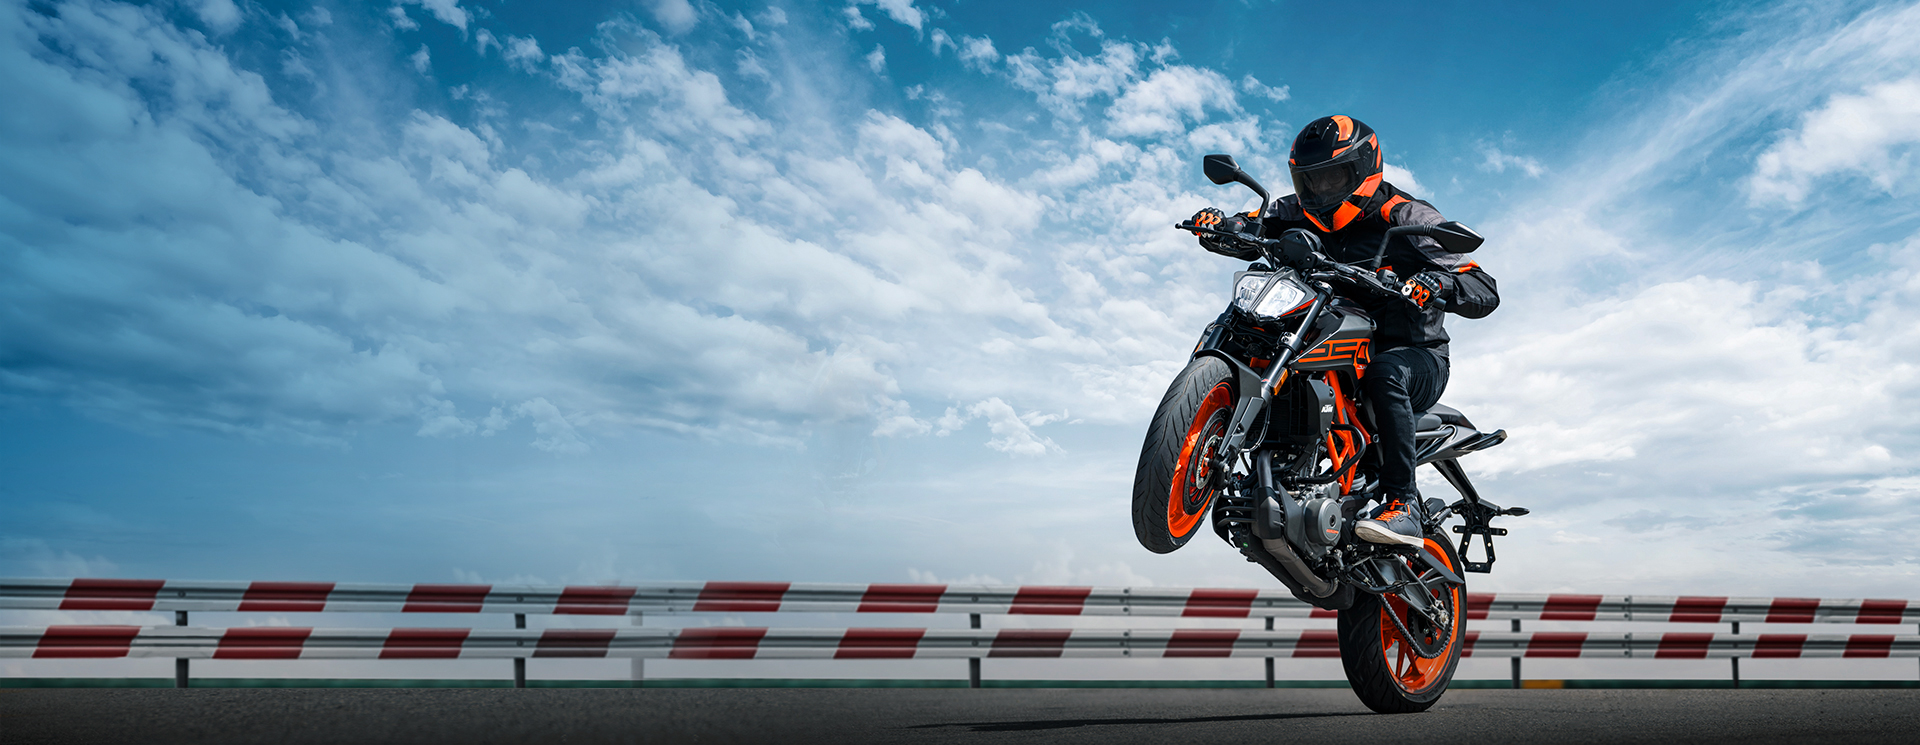 KTM 250 Duke - Price, Colors, Images, Specifications